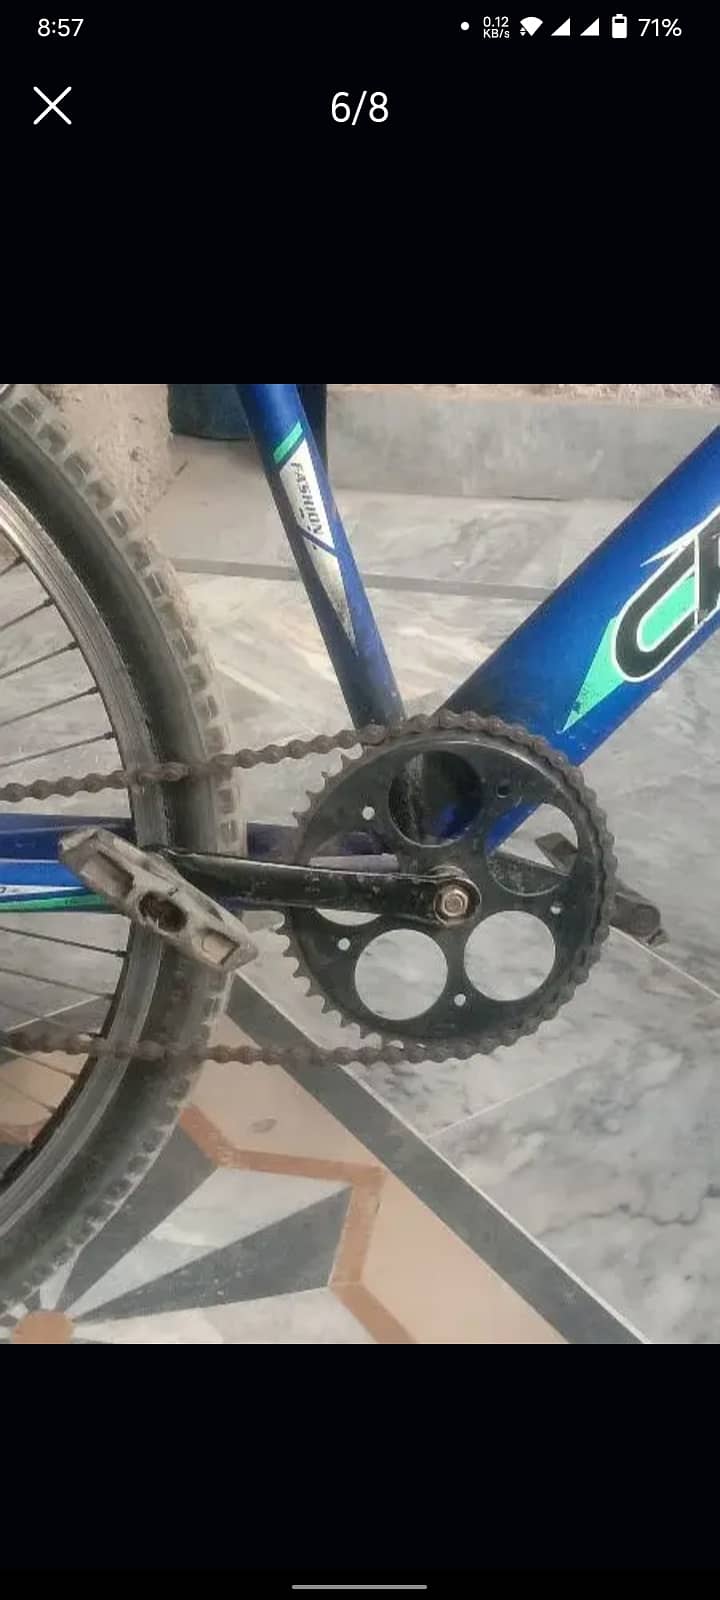 Urgent Bicycle sell 1